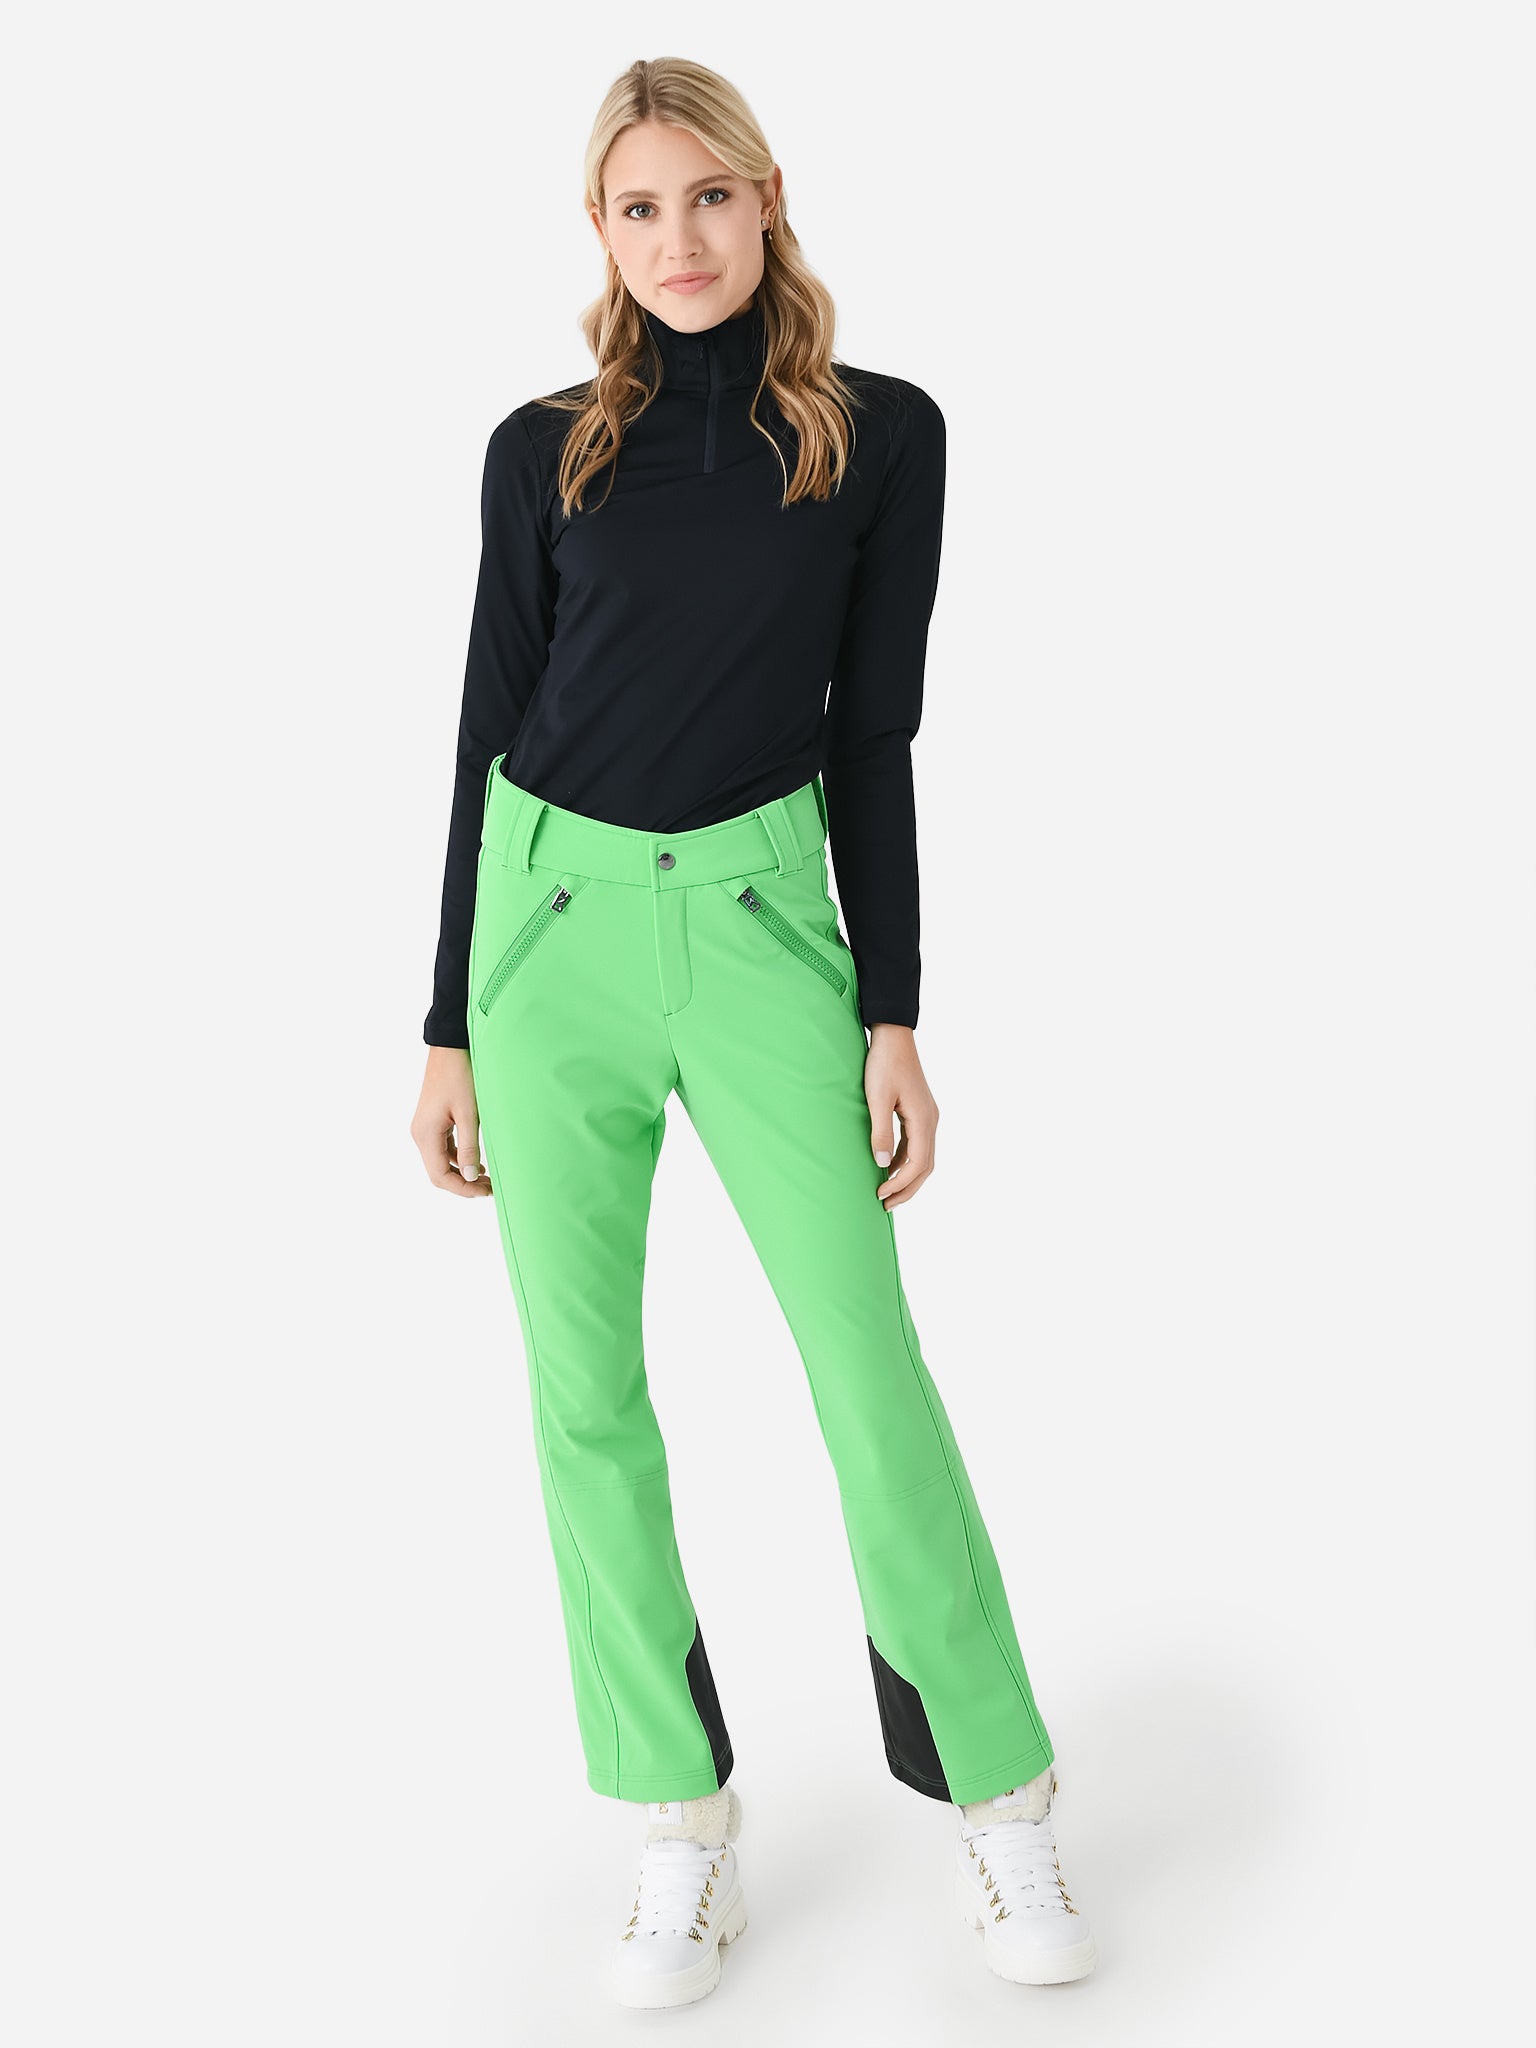 Ladies Cropped Wide Leg Summer Trousers in Light Green